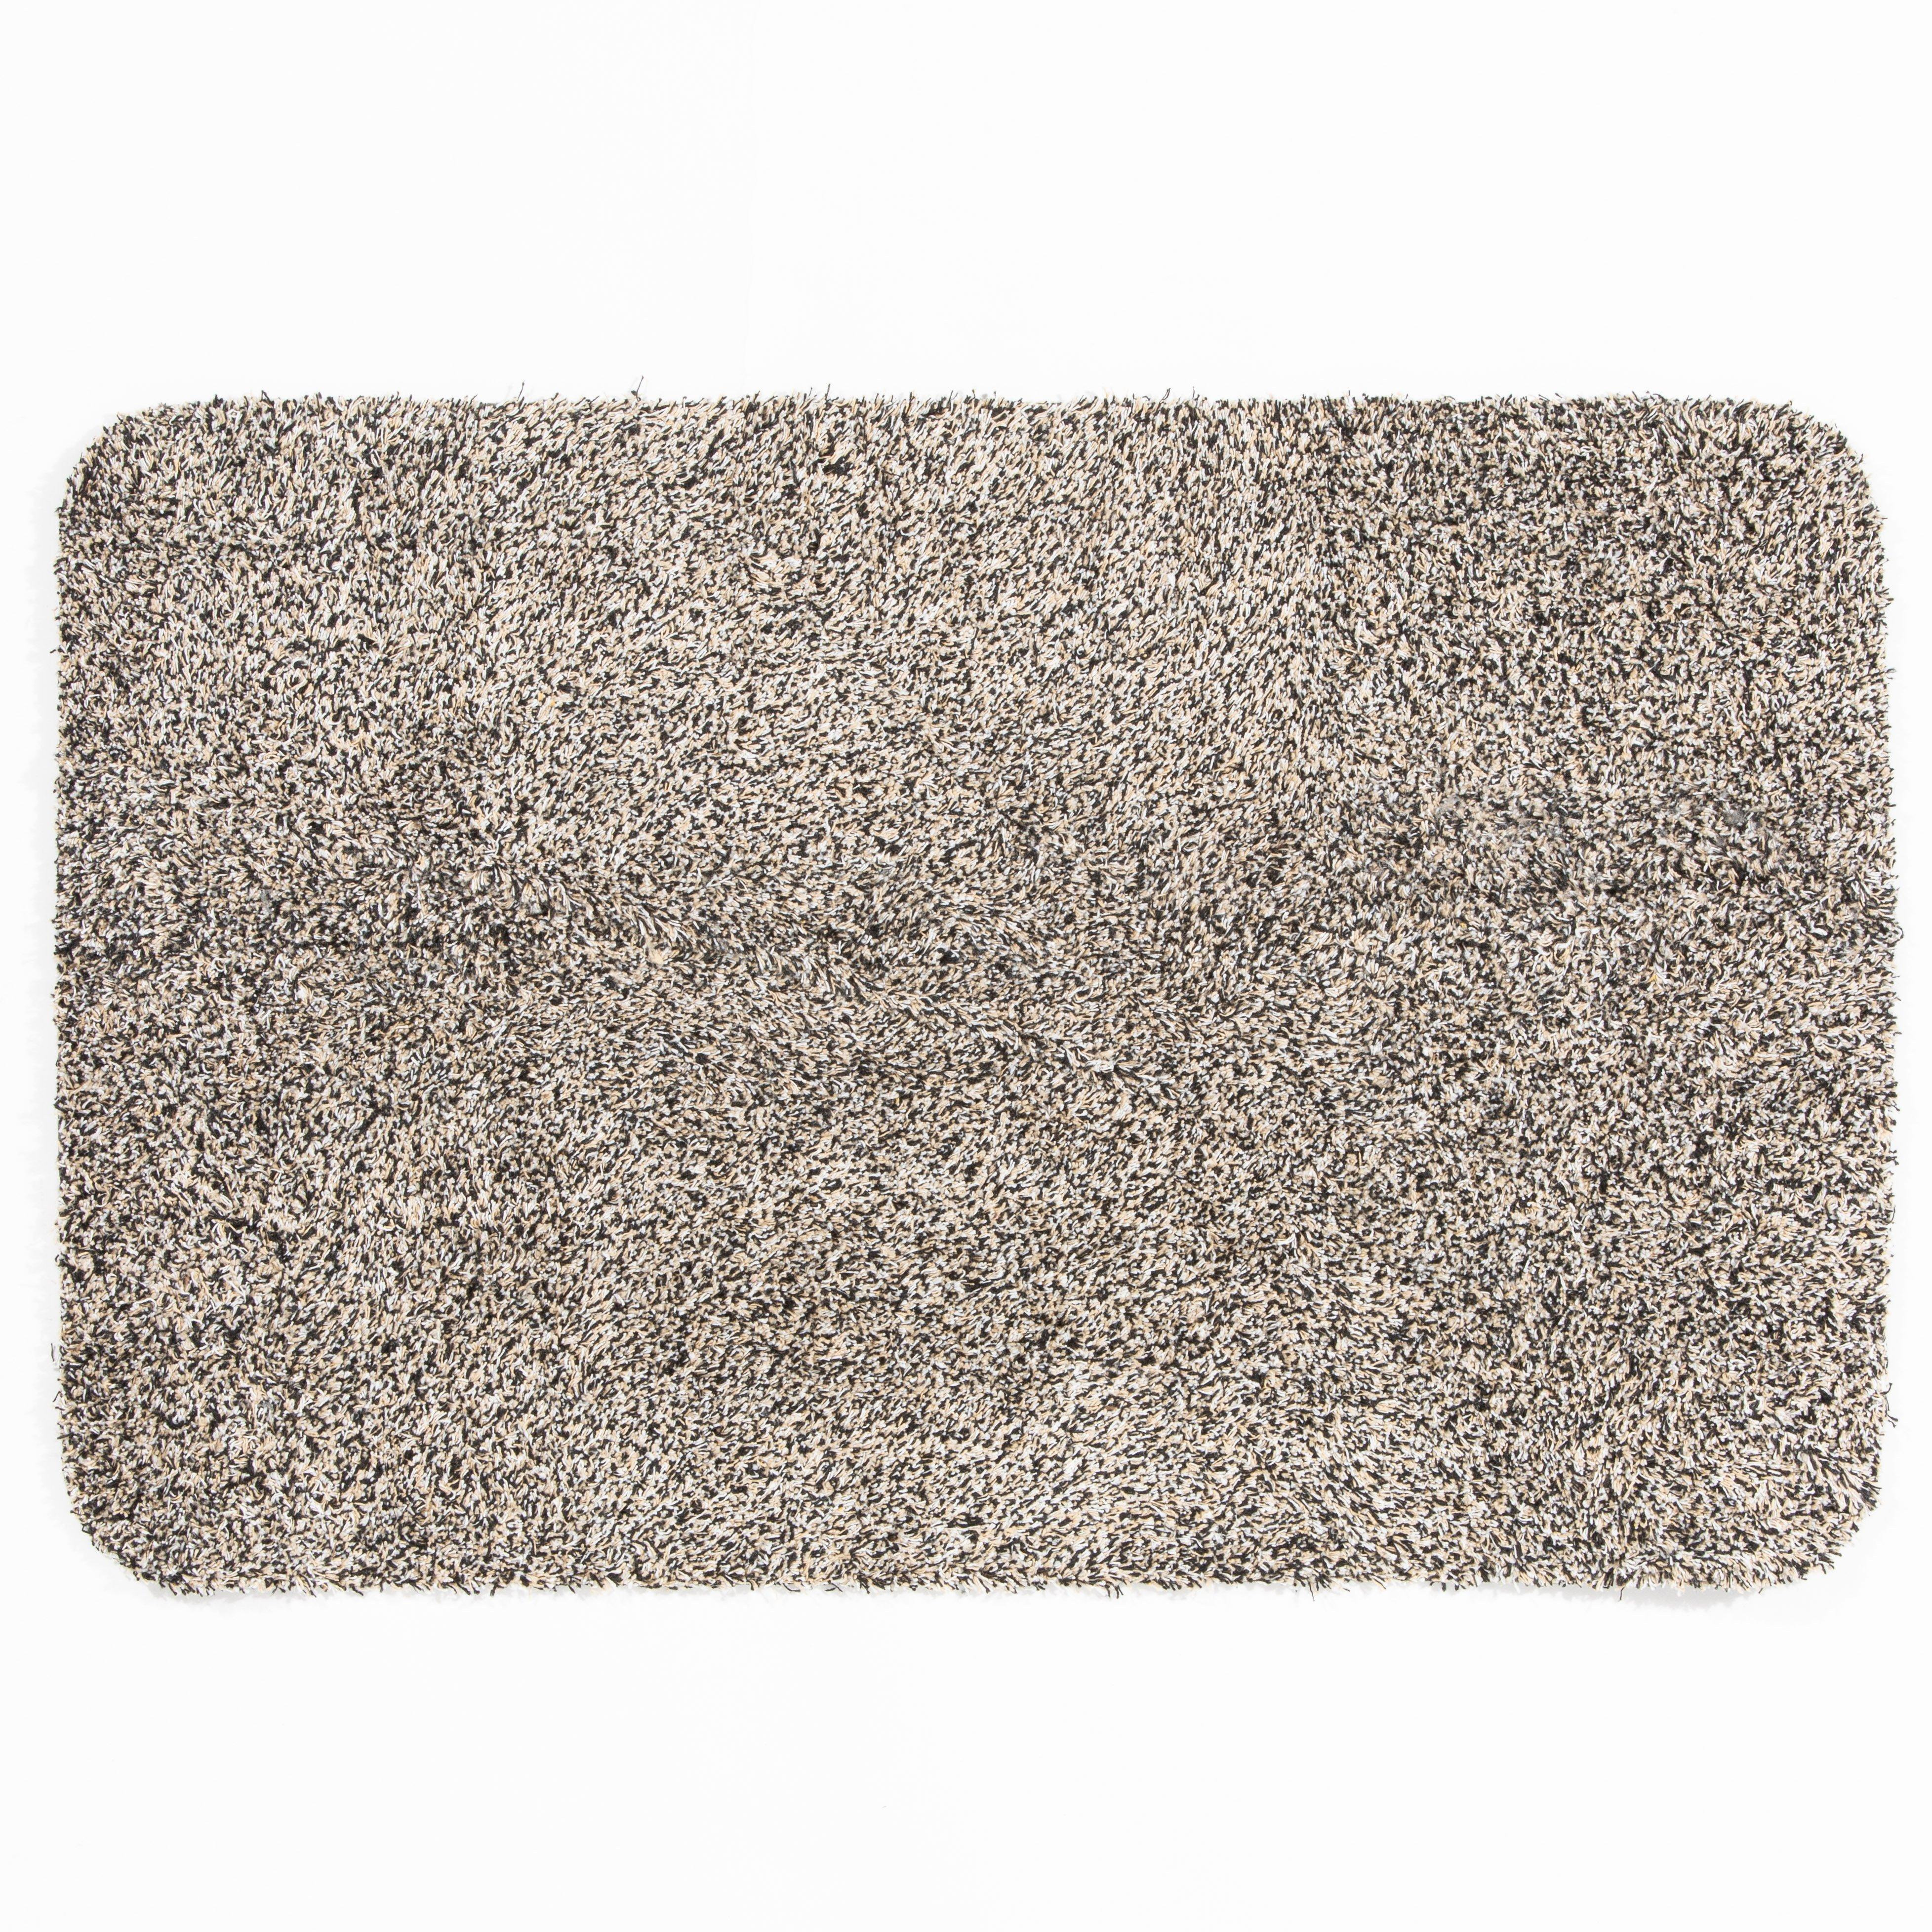 Bowden Polyester Cotton Washable Mat with TPR Backing - image 1